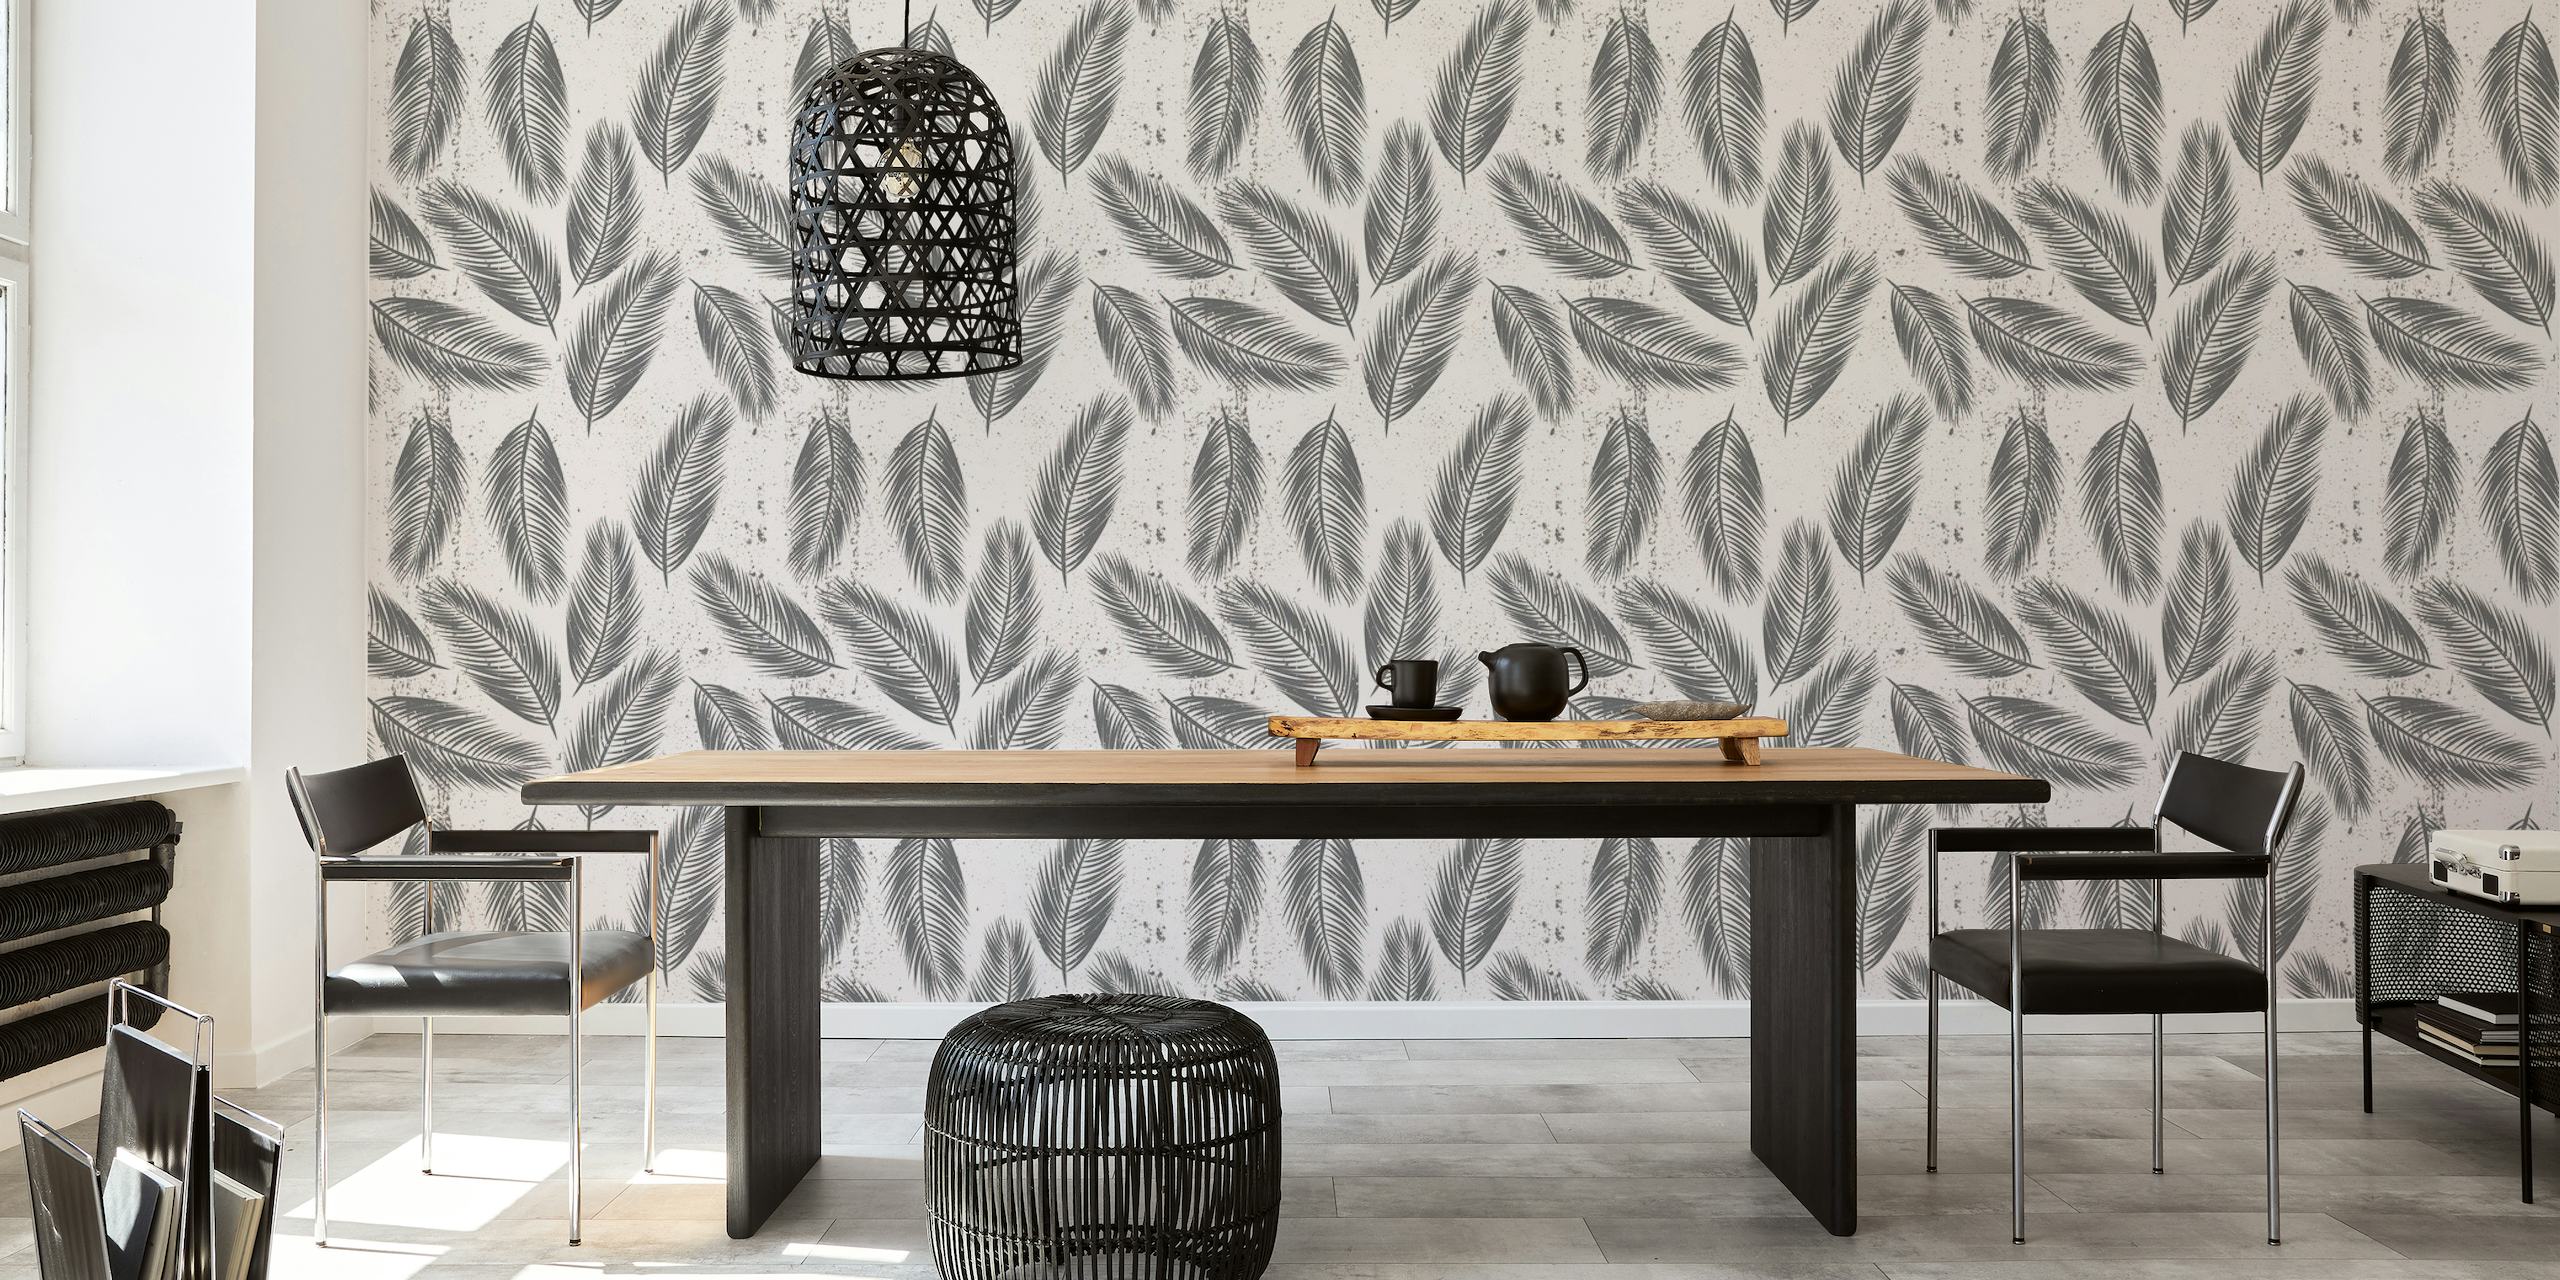 Light-toned palm leaves pattern on wall mural for a romantic decor theme